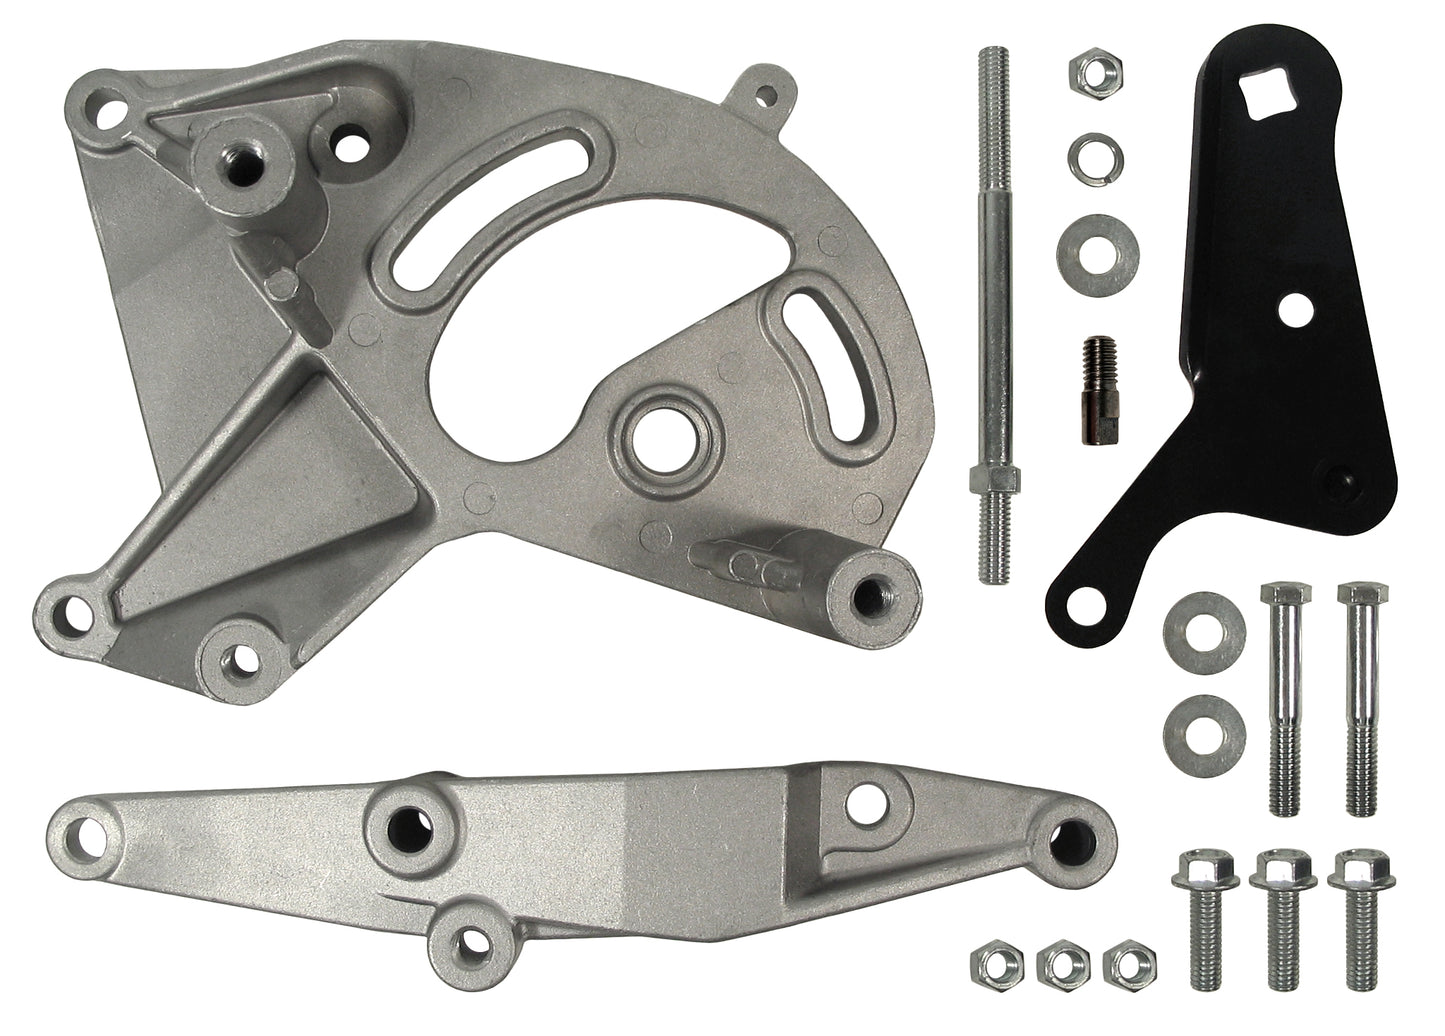 JEEP POWER STEERING KIT,BOX,PUMP,SHAFT,V8 BRACKET,76-86,DOUBLE PULLEY FOR A/C